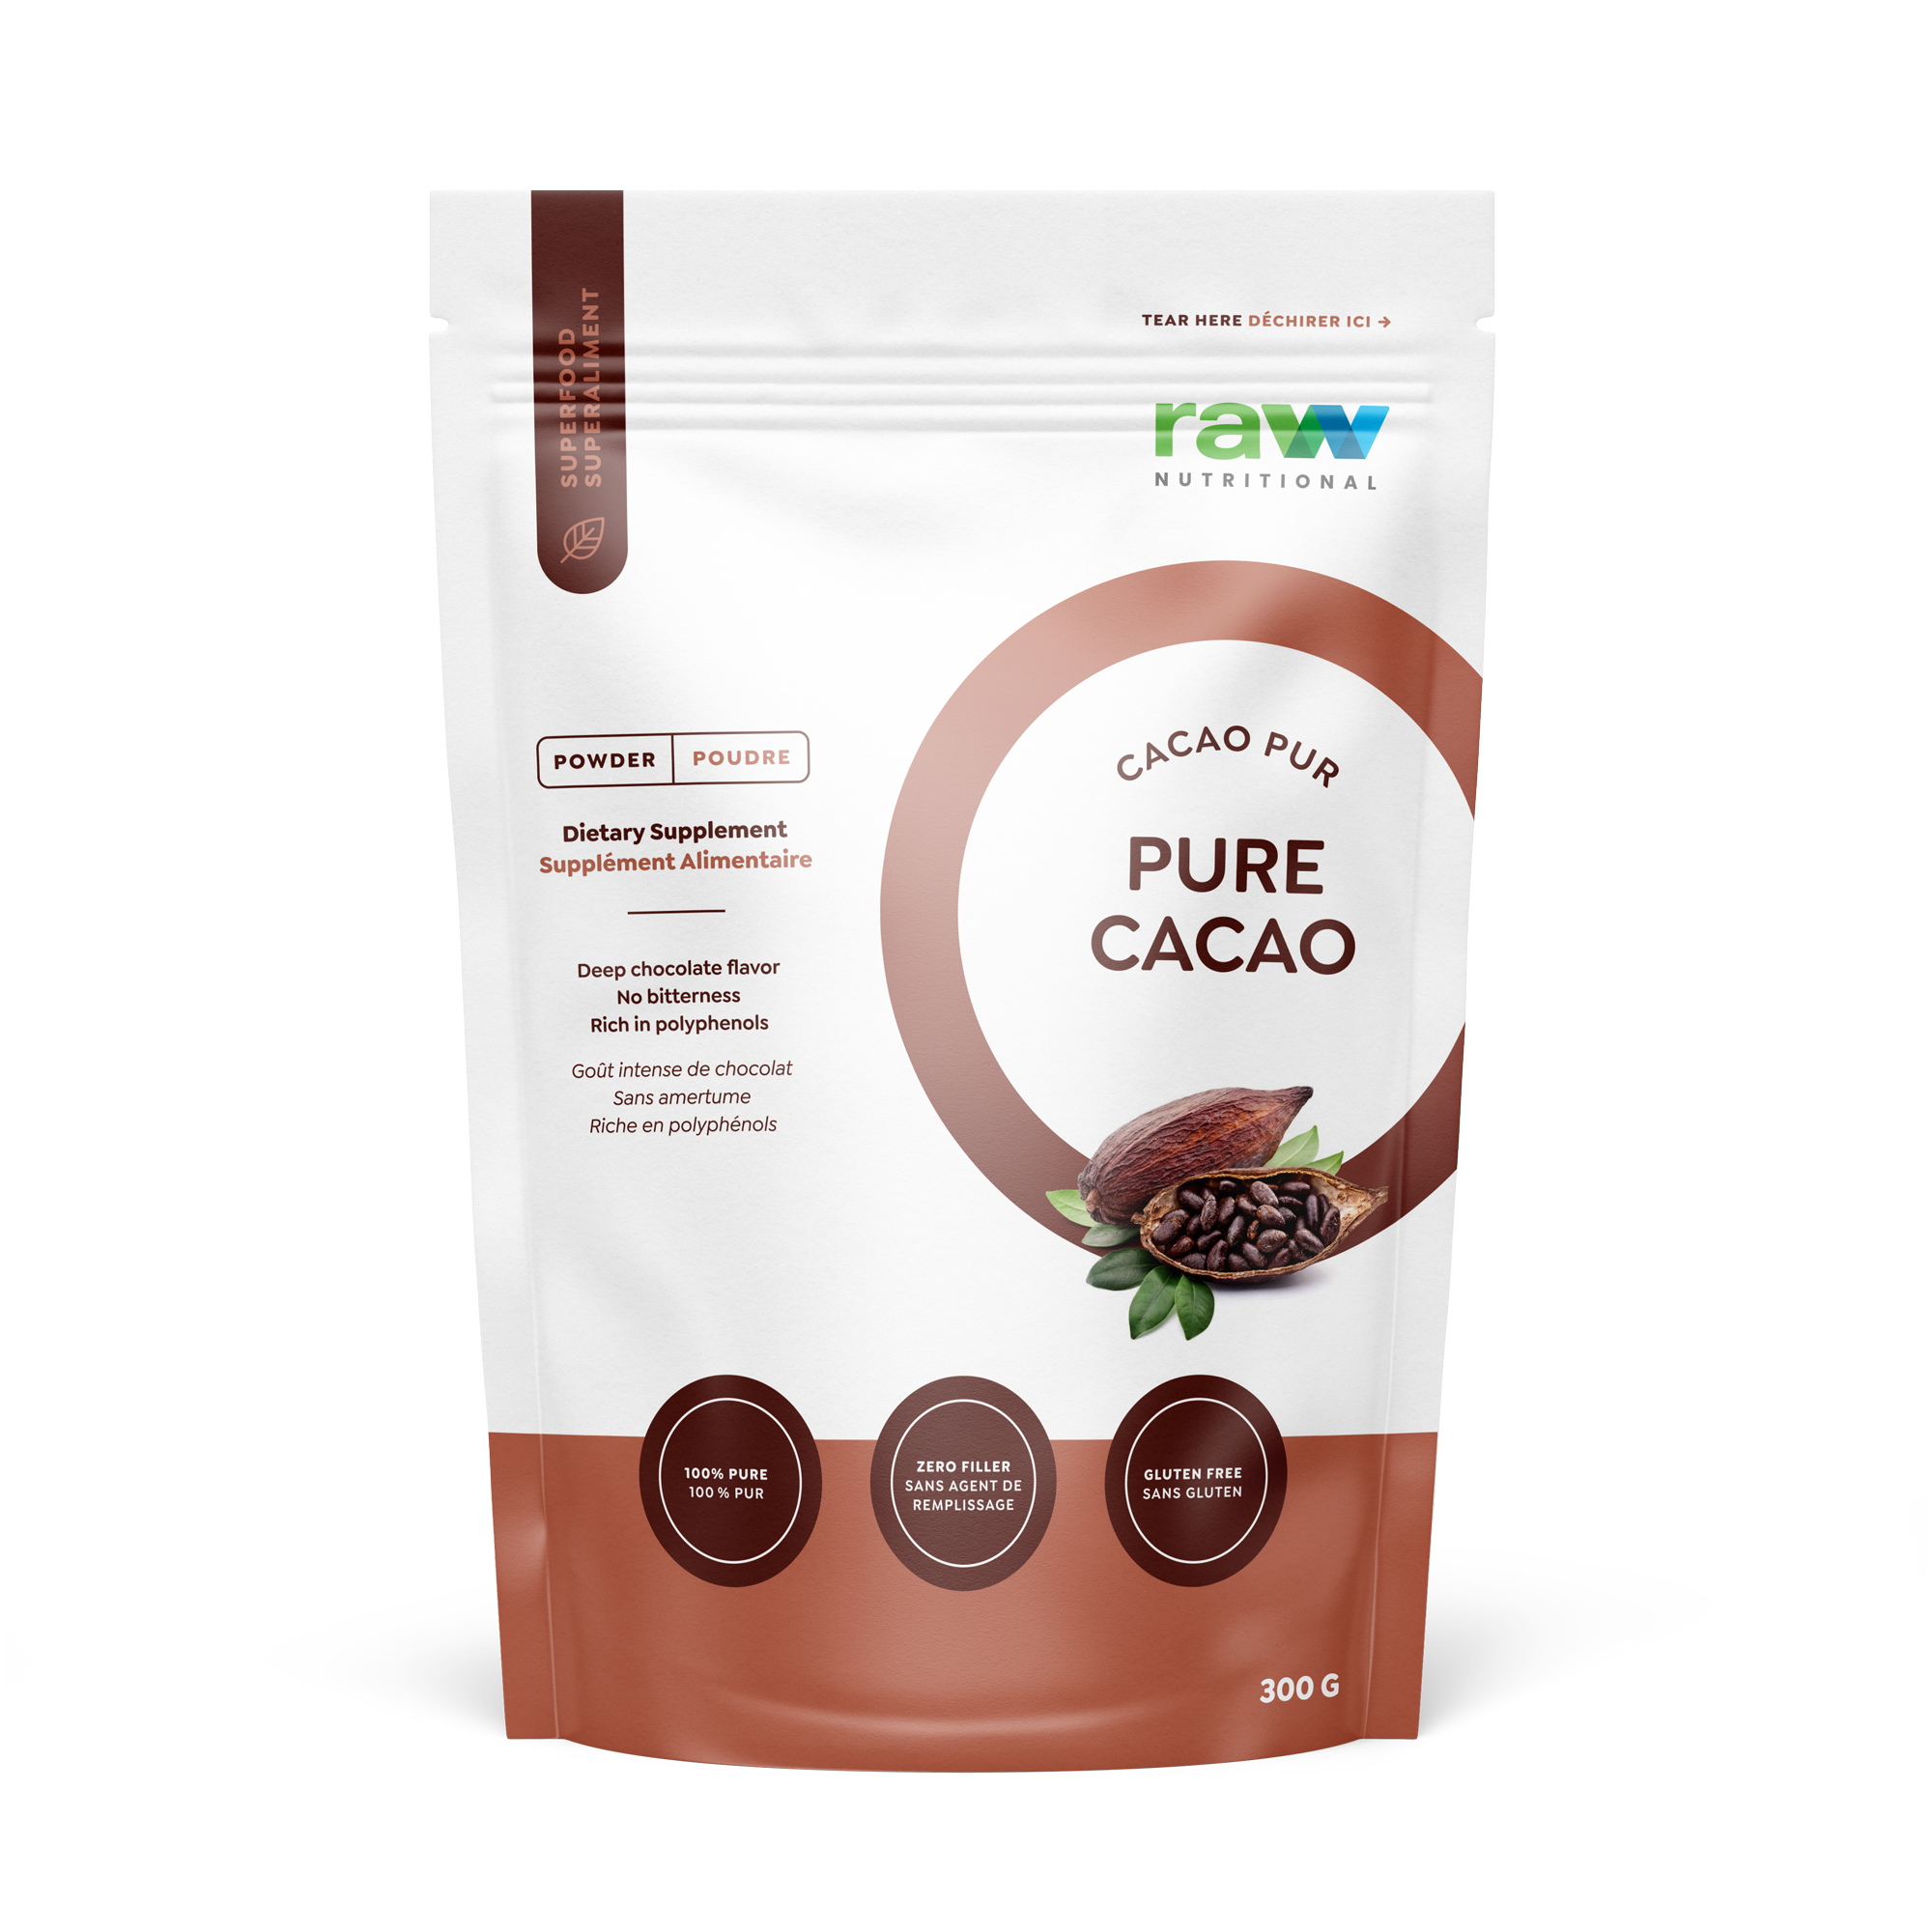 Pure Cacao||Cacao Pur